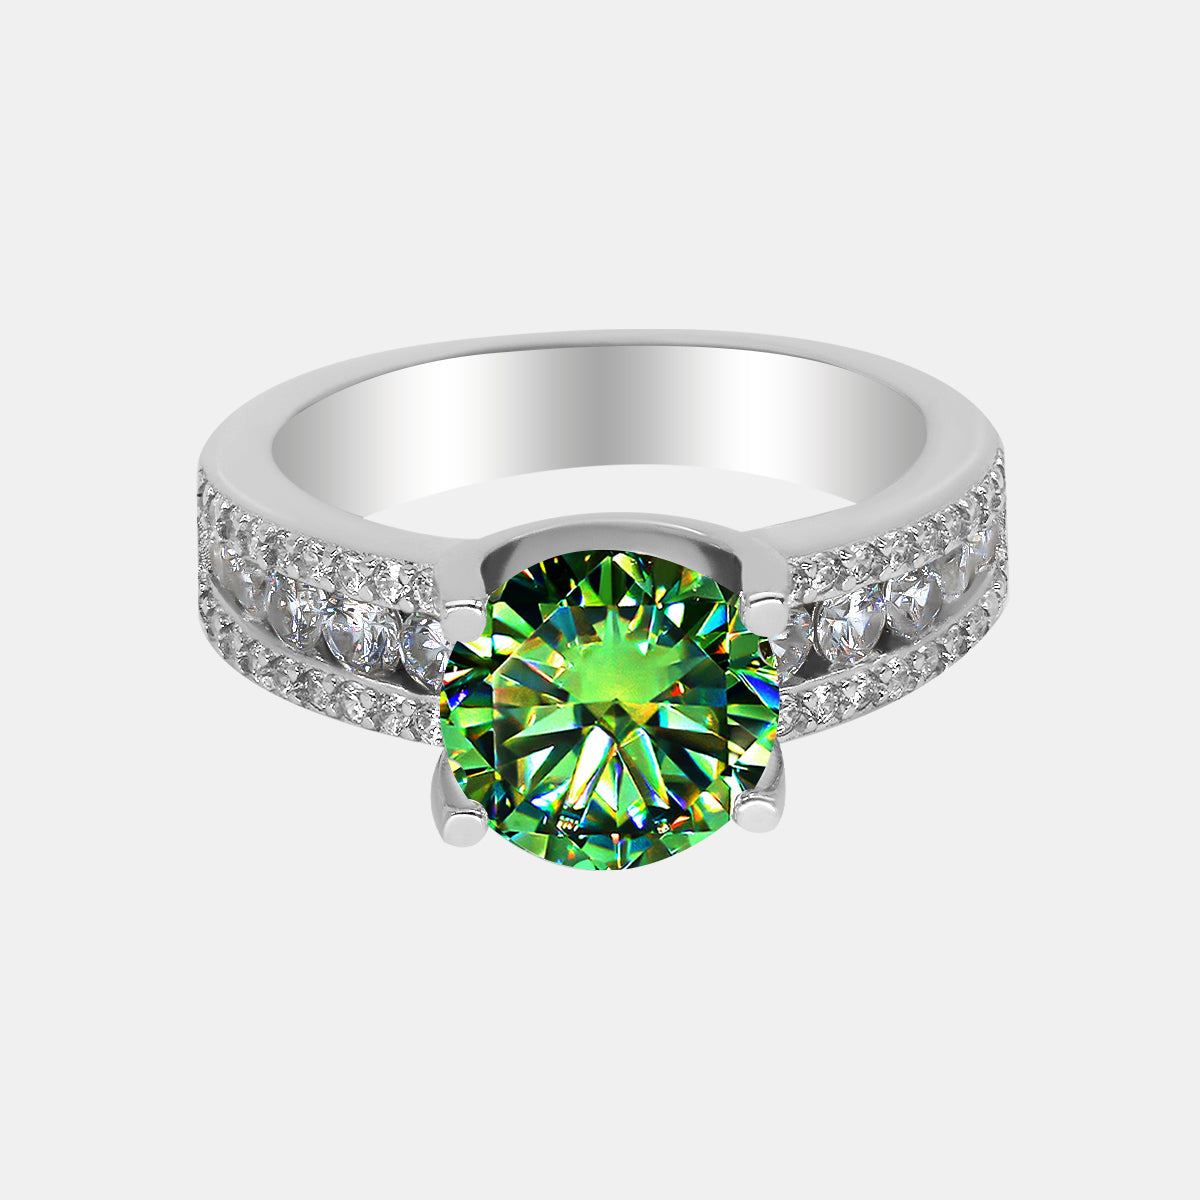 【401】"Deck the Hall" Paved Channel 3 Carat Moissanite Ring